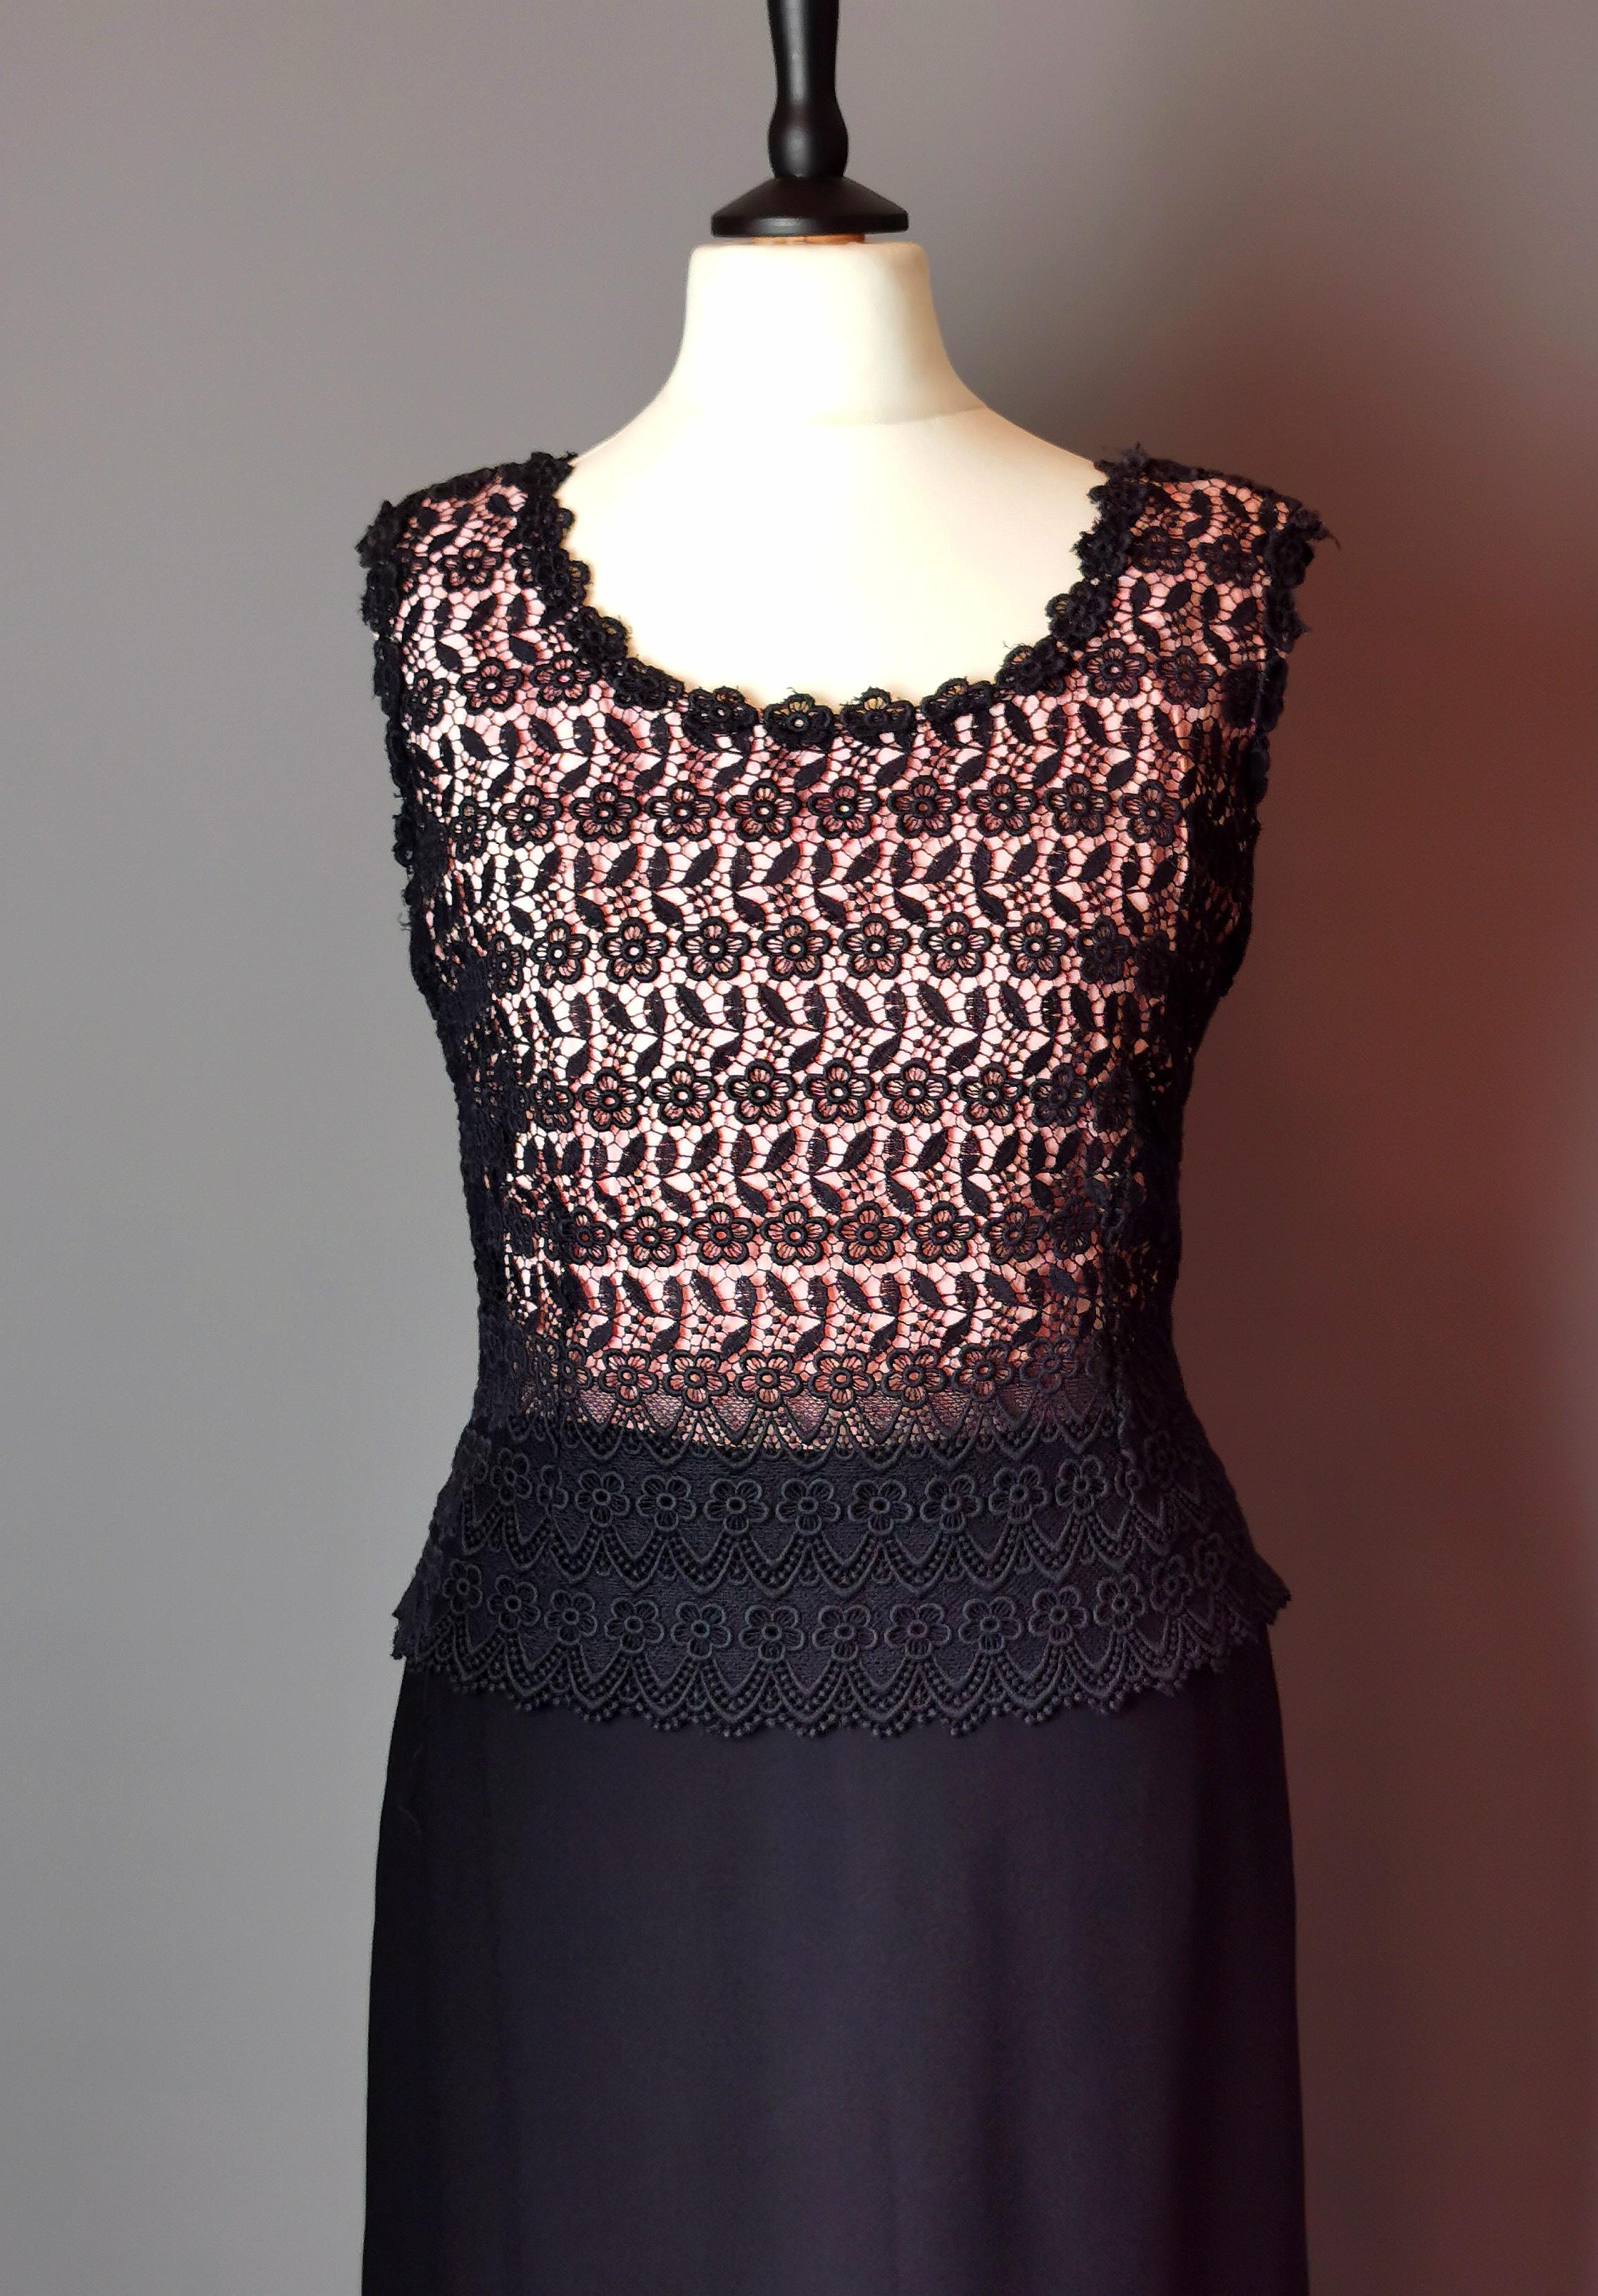 Vintage 1970s Guipure lace overlay dress, Black and Pink  For Sale 5